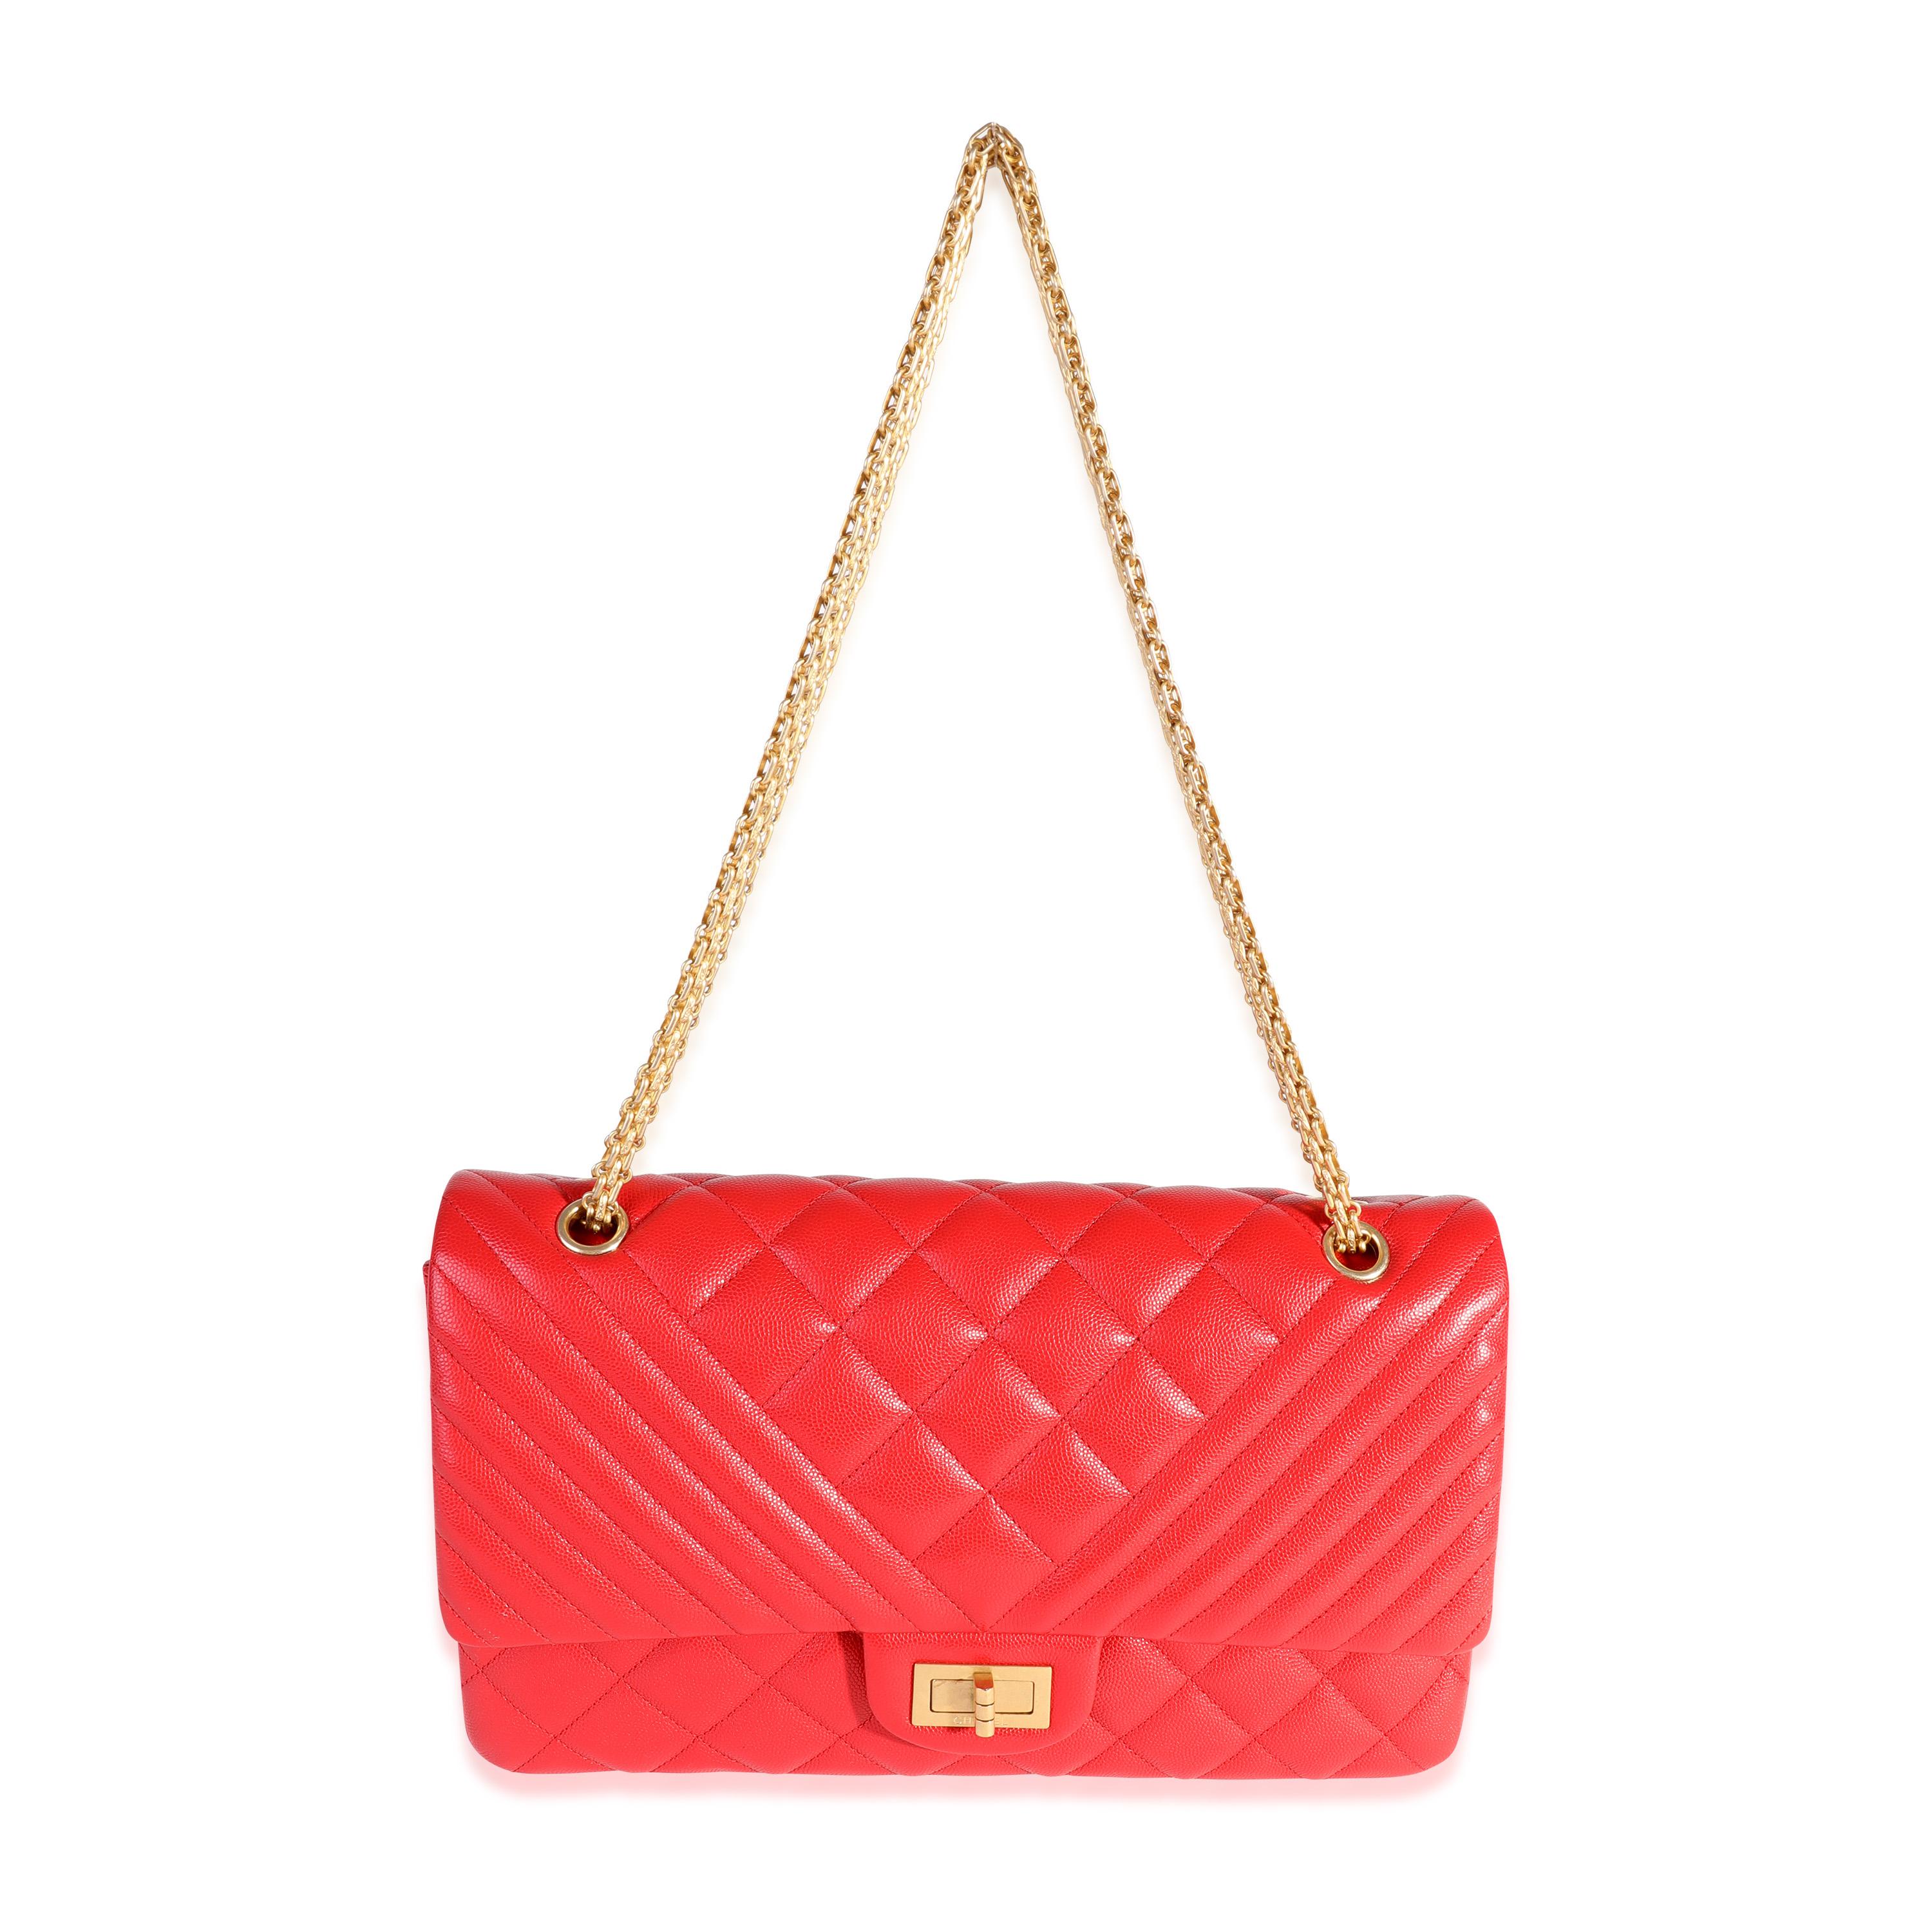 Listing Title: Chanel Red Quilted Caviar Reissue 2.55 227 Double Flap Bag
SKU: 116640
MSRP: 9500.00
Condition: Pre-owned (3000)
Handbag Condition: Very Good
Condition Comments: Very Good Condition. Scratching and light tarnishing to hardware.
Brand: